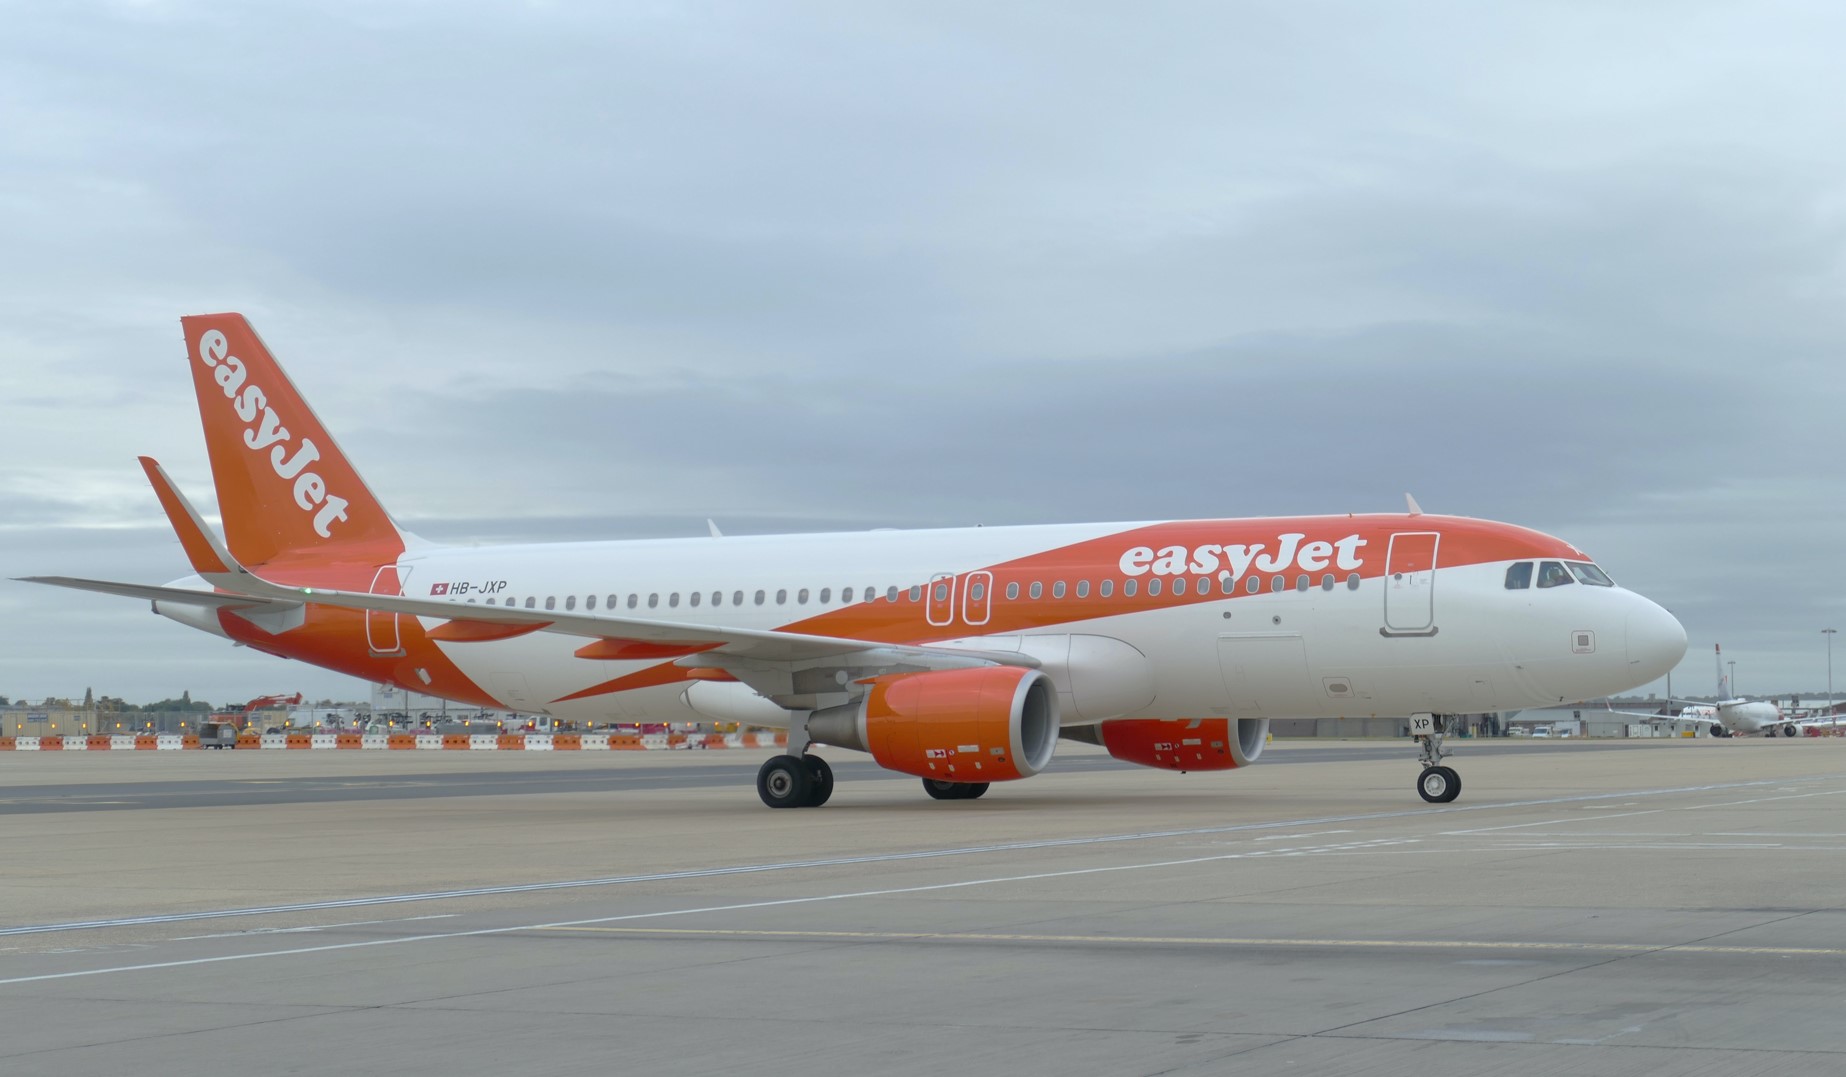 Edinburgh Airport also accessible by popular European budget airlines, like Easyjet. 